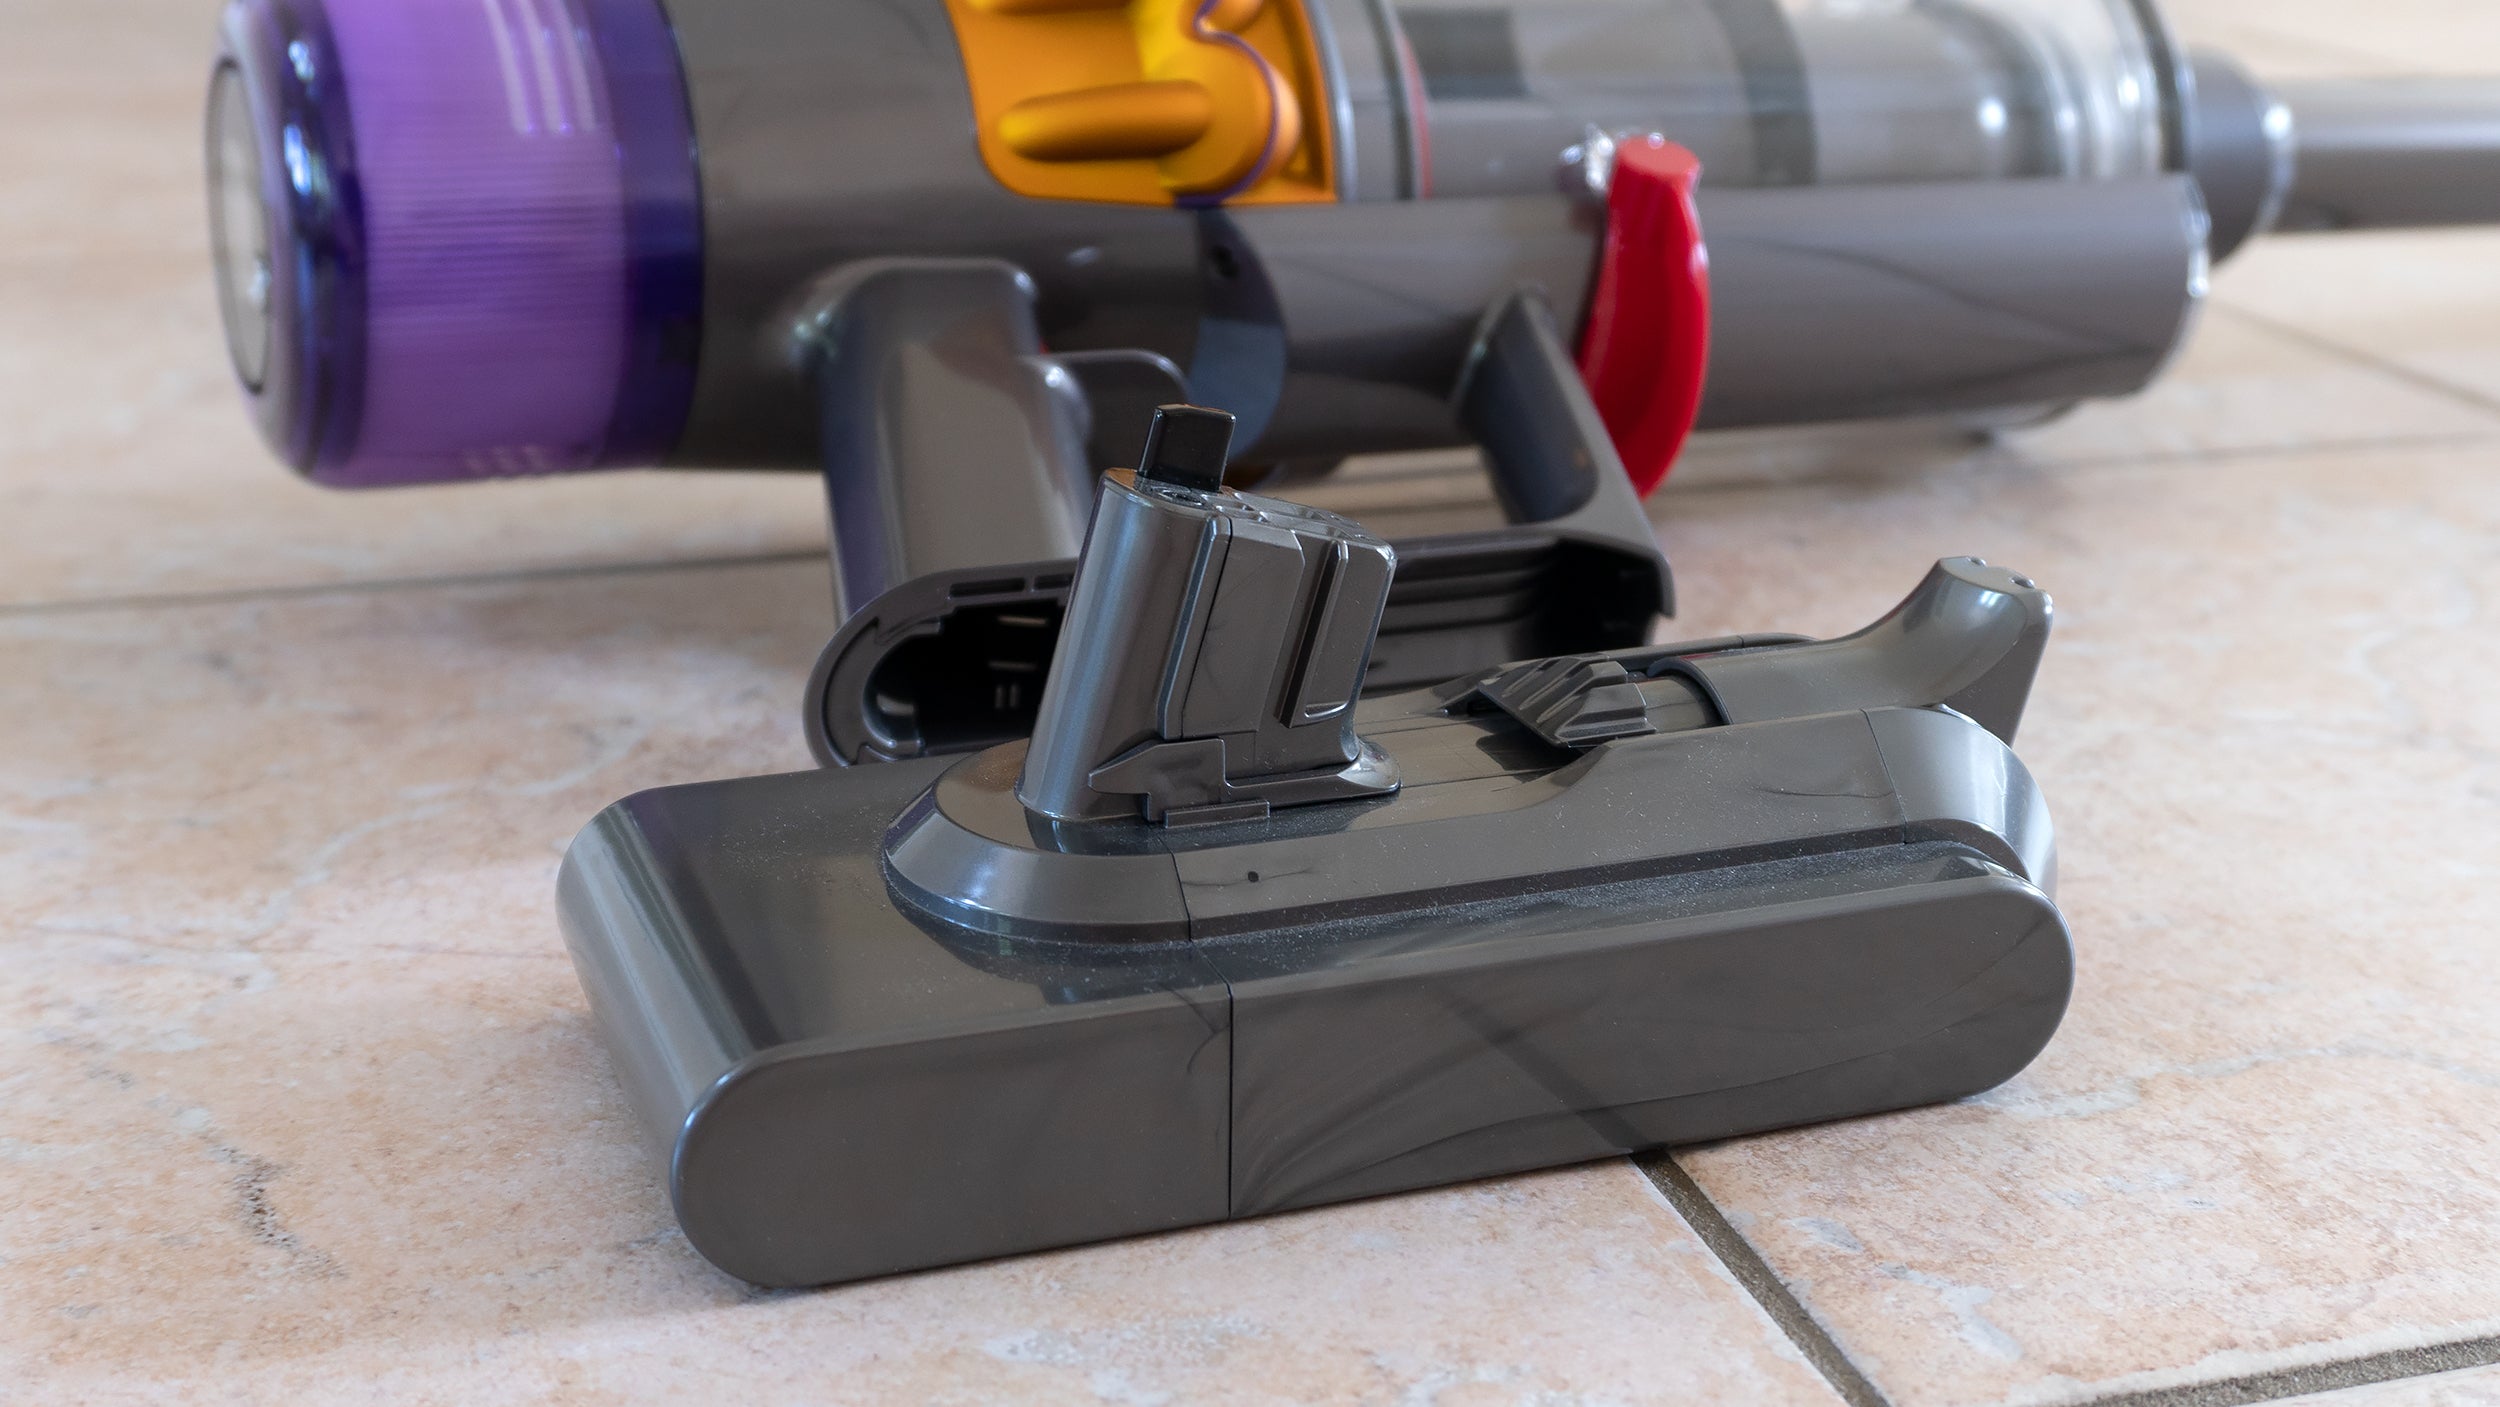 Like the Dyson V11 Outsize, the V15 Detect includes an easily swappable battery, so if you need to clean for hours, you can keep spares on hand and swap fresh batteries in as they die. (Photo: Andrew Liszewski/Gizmodo)